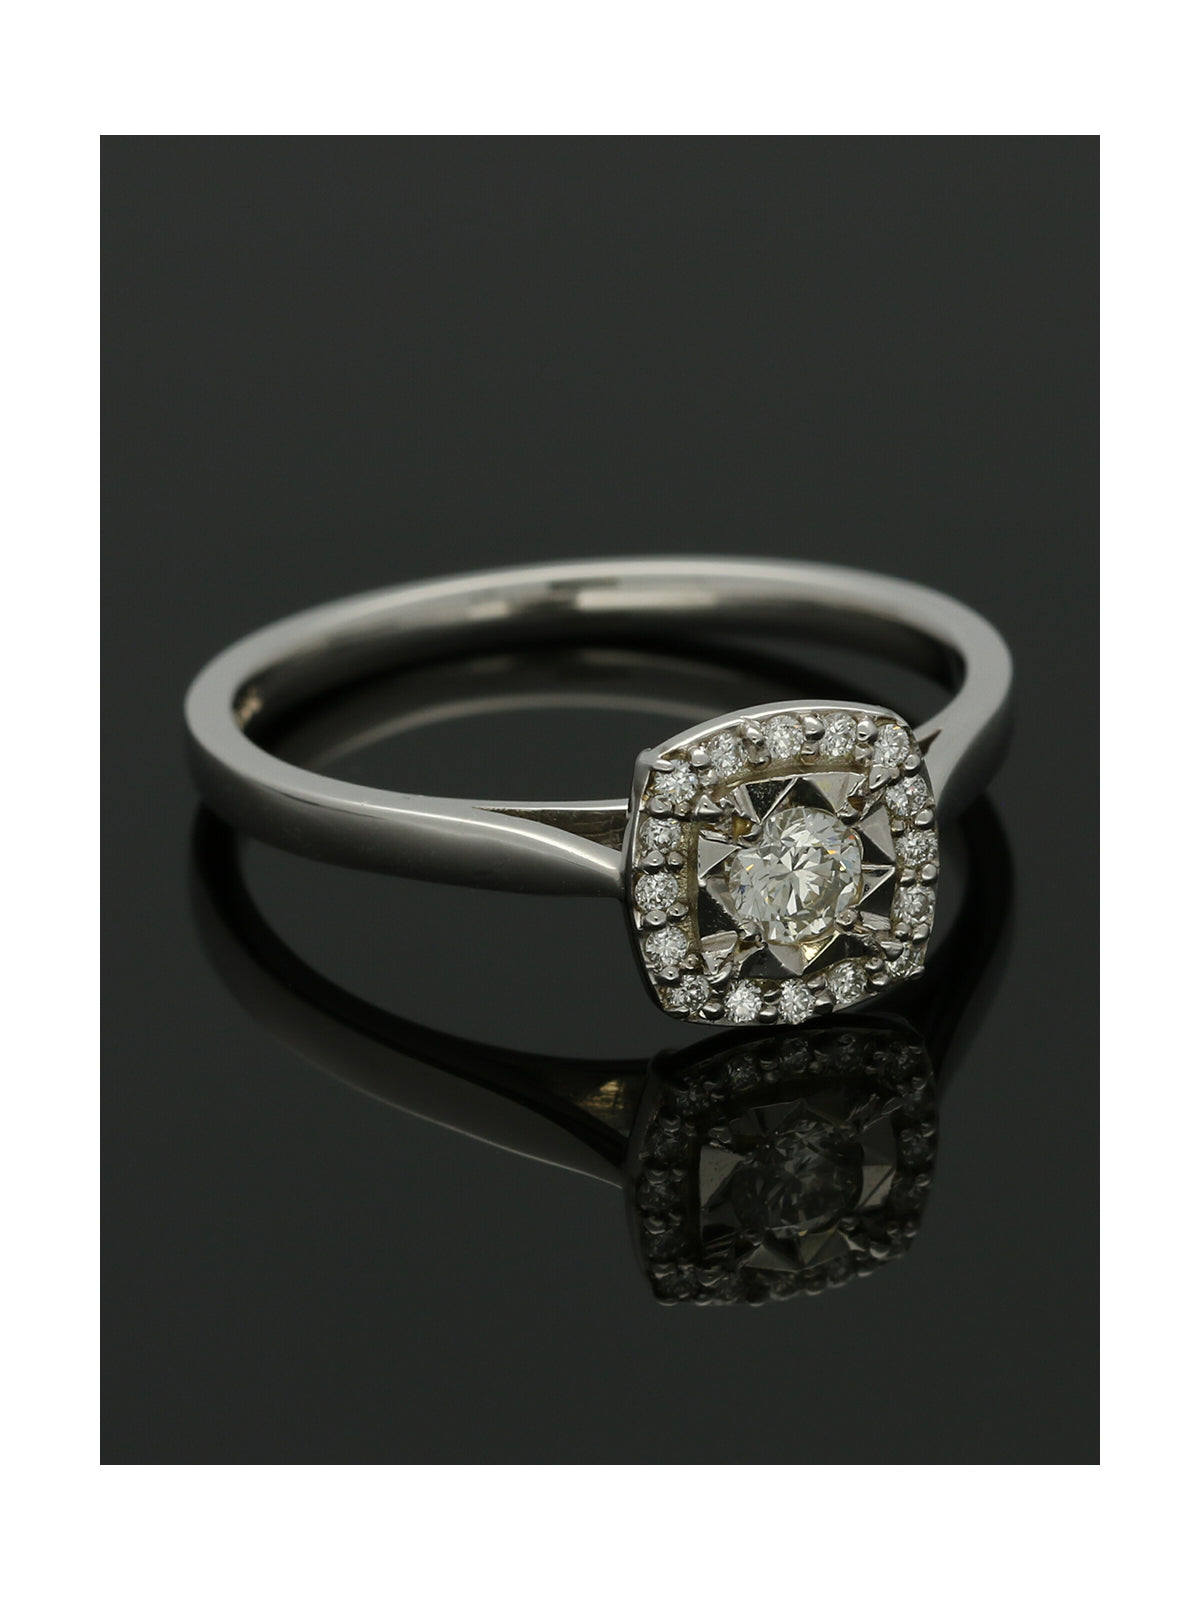 SALE Diamond Cushion Shaped Cluster Ring in 9ct White Gold